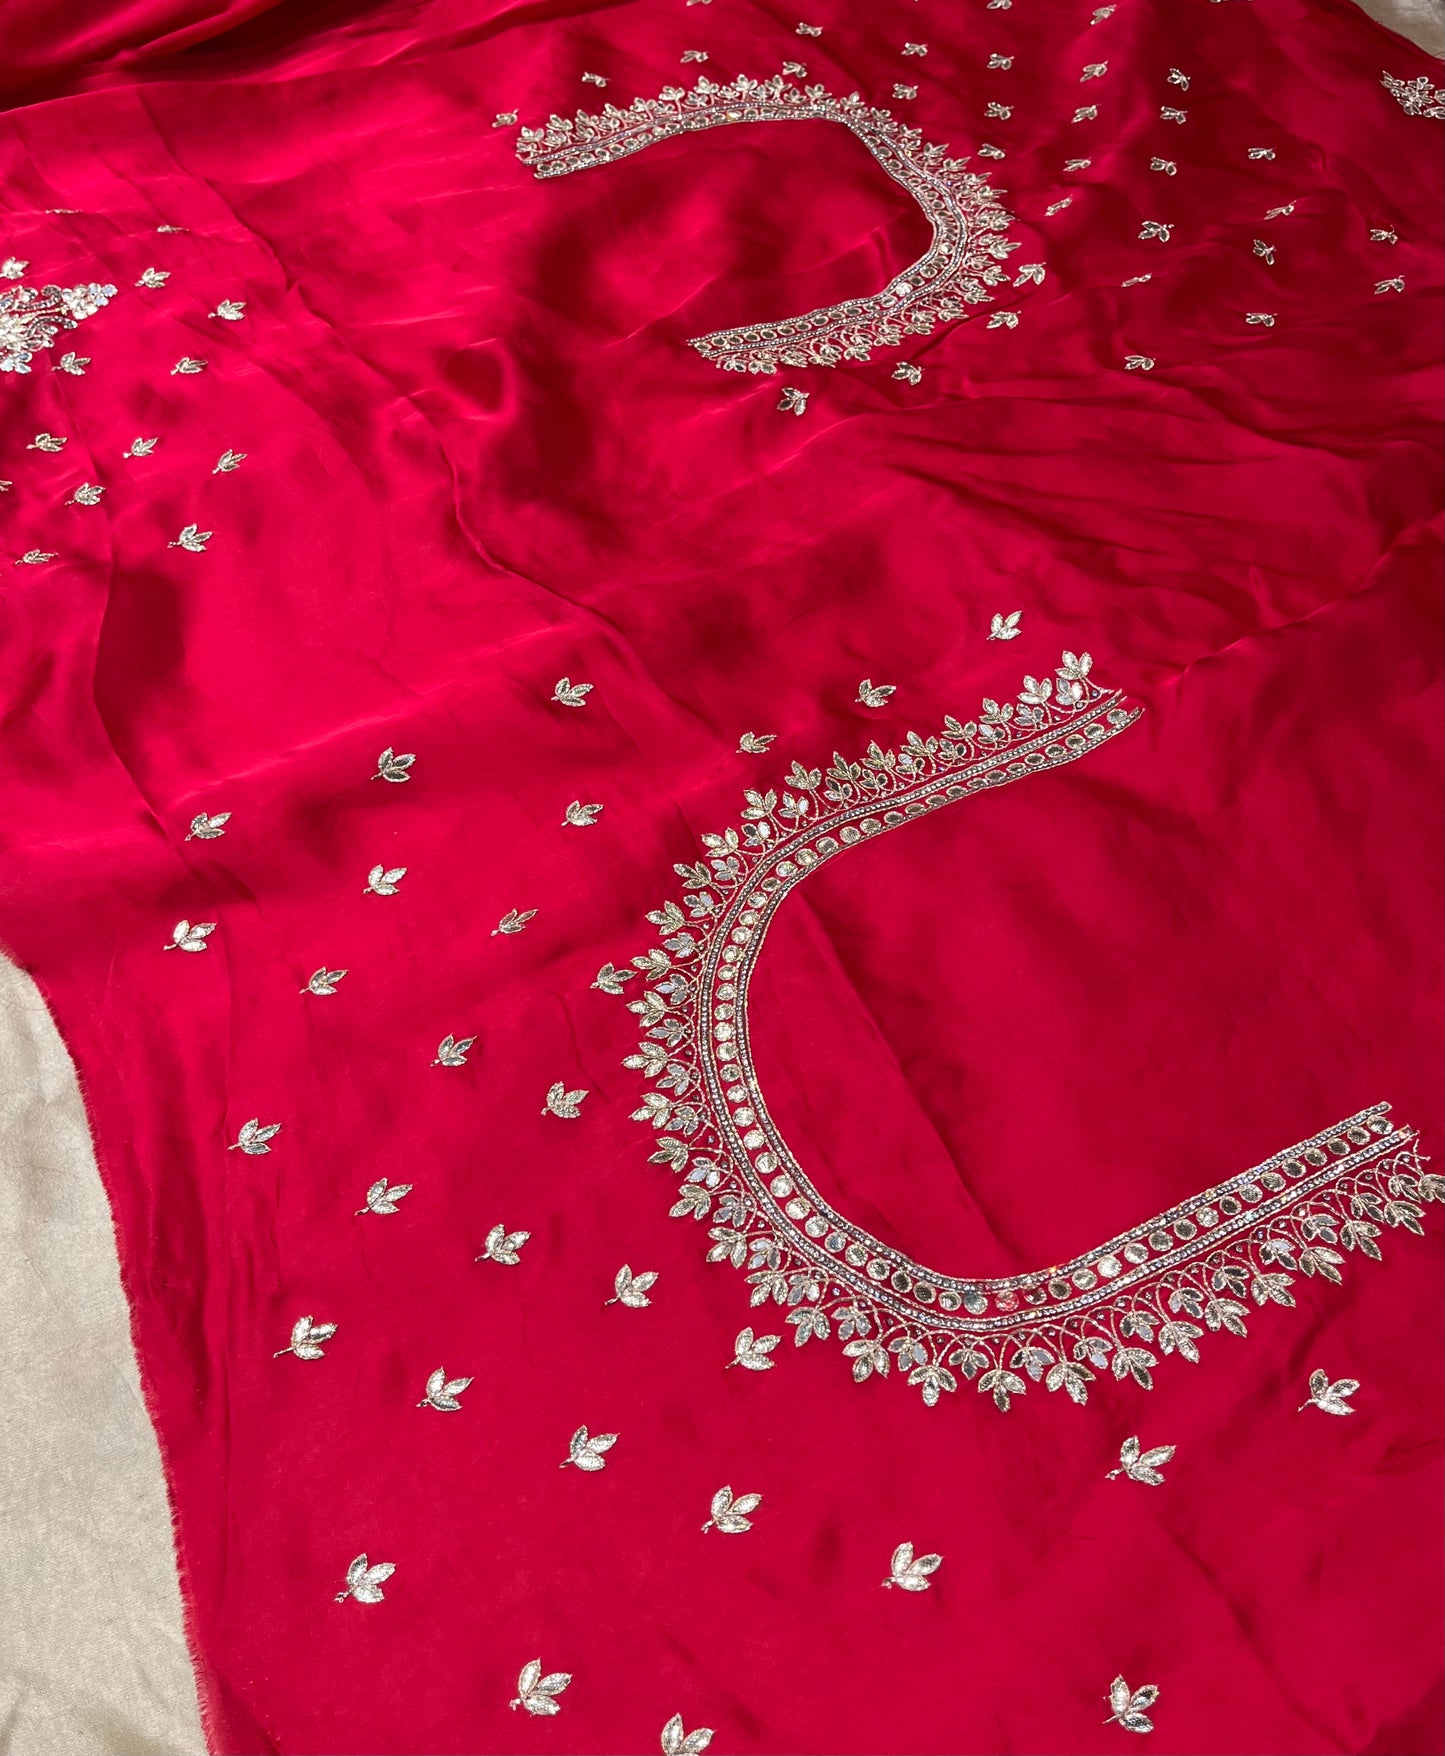 HOT PINK COLOUR PURE SATIN SILK ORGANZA EMBROIDERED SAREE EMBELLISHED WITH GOTA PATTI & MIRROR FOIL WORK